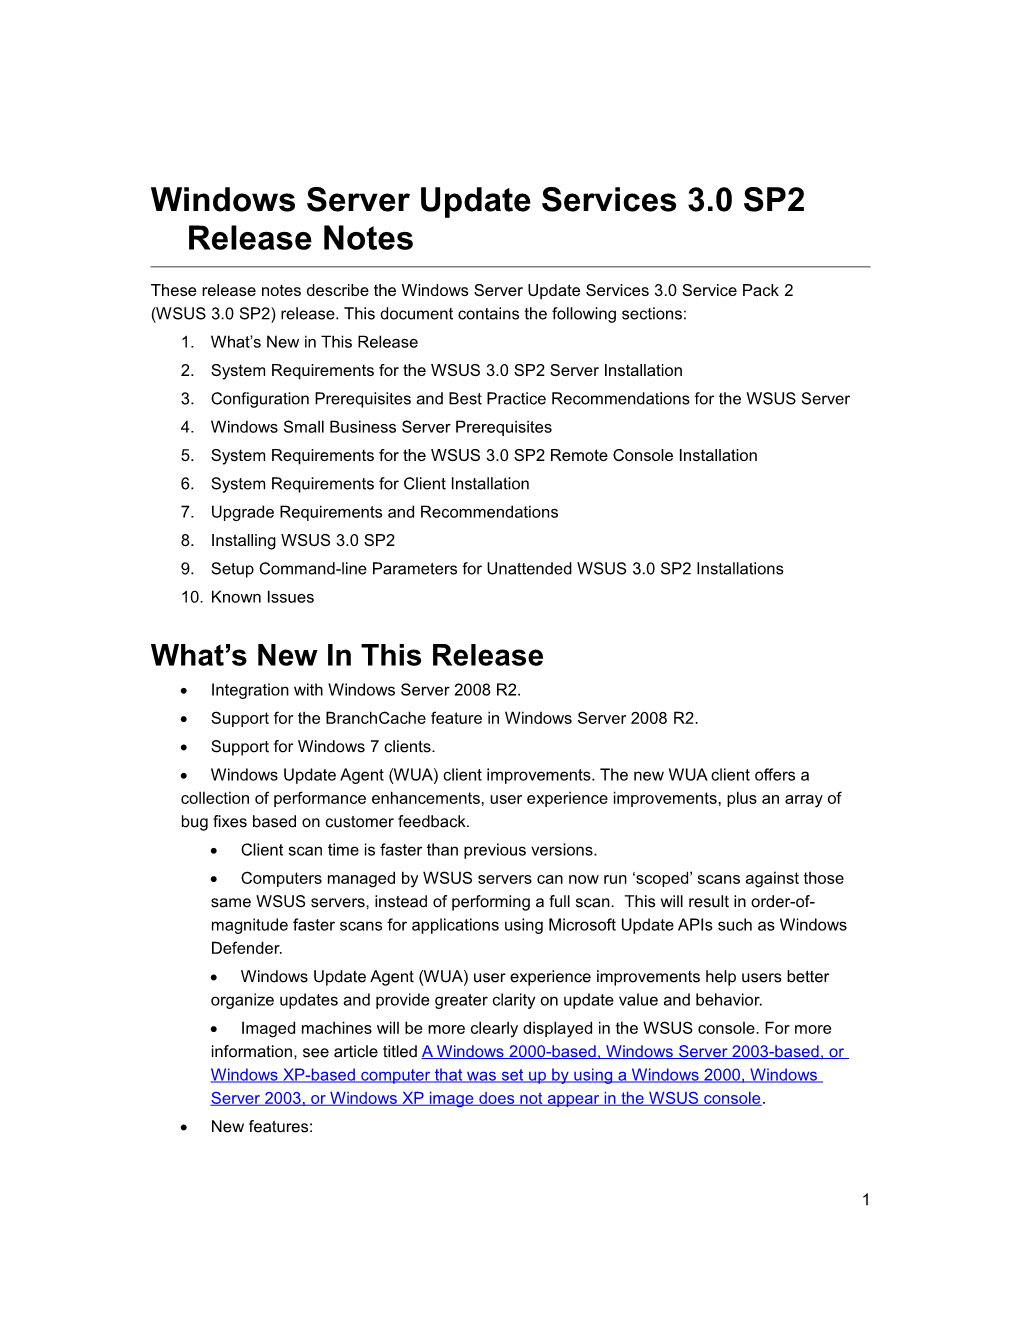 Windows Server Update Services 3.0 SP2 Release Notes